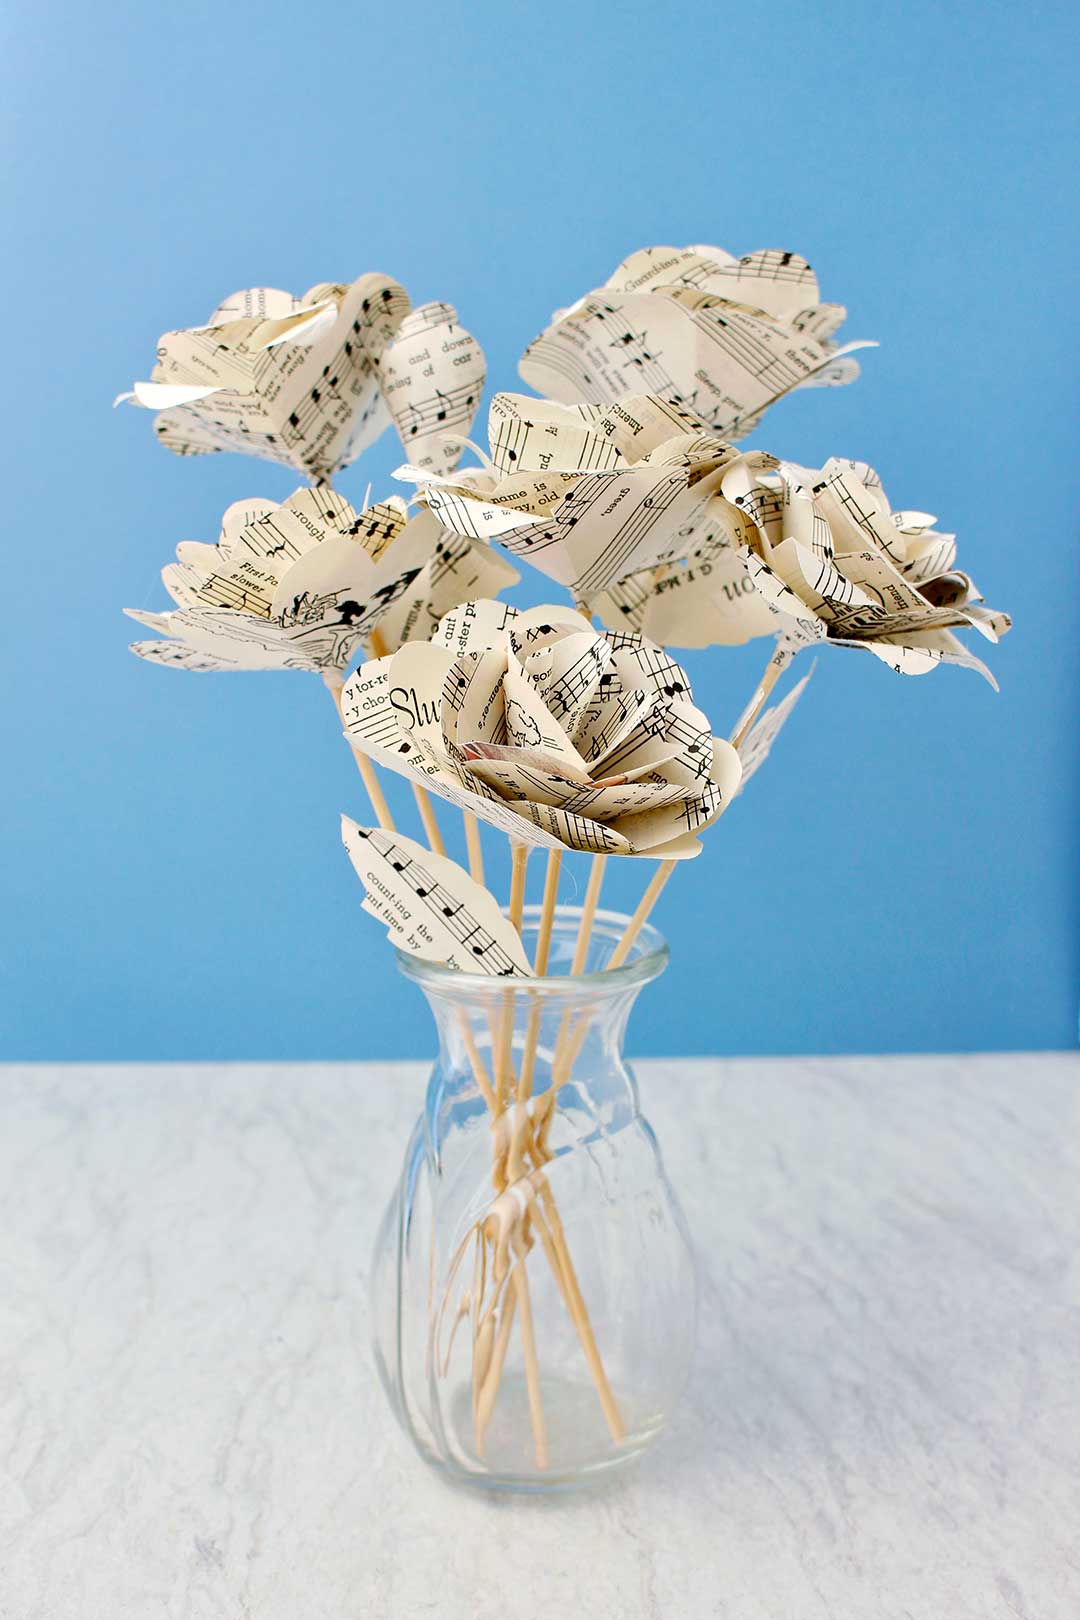 Completed Book Page Roses made from sheet music on wooden dowel stems in a glass vase with a blue background behind it.